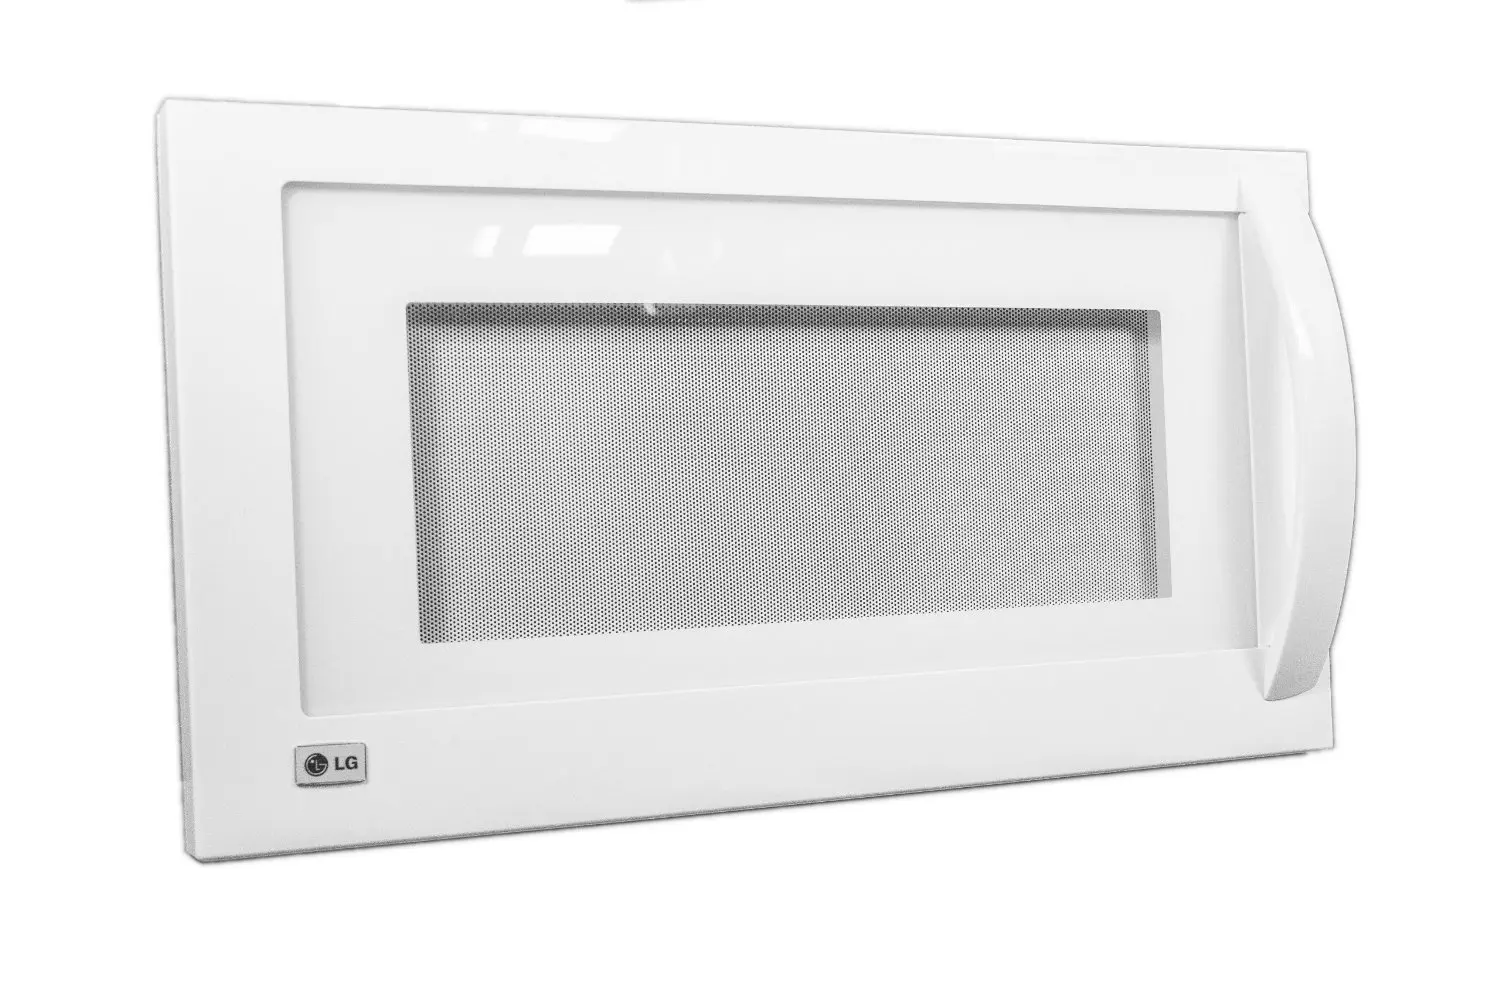 Buy LG Electronics ADC34753818 Microwave Oven Door Assembly in Cheap